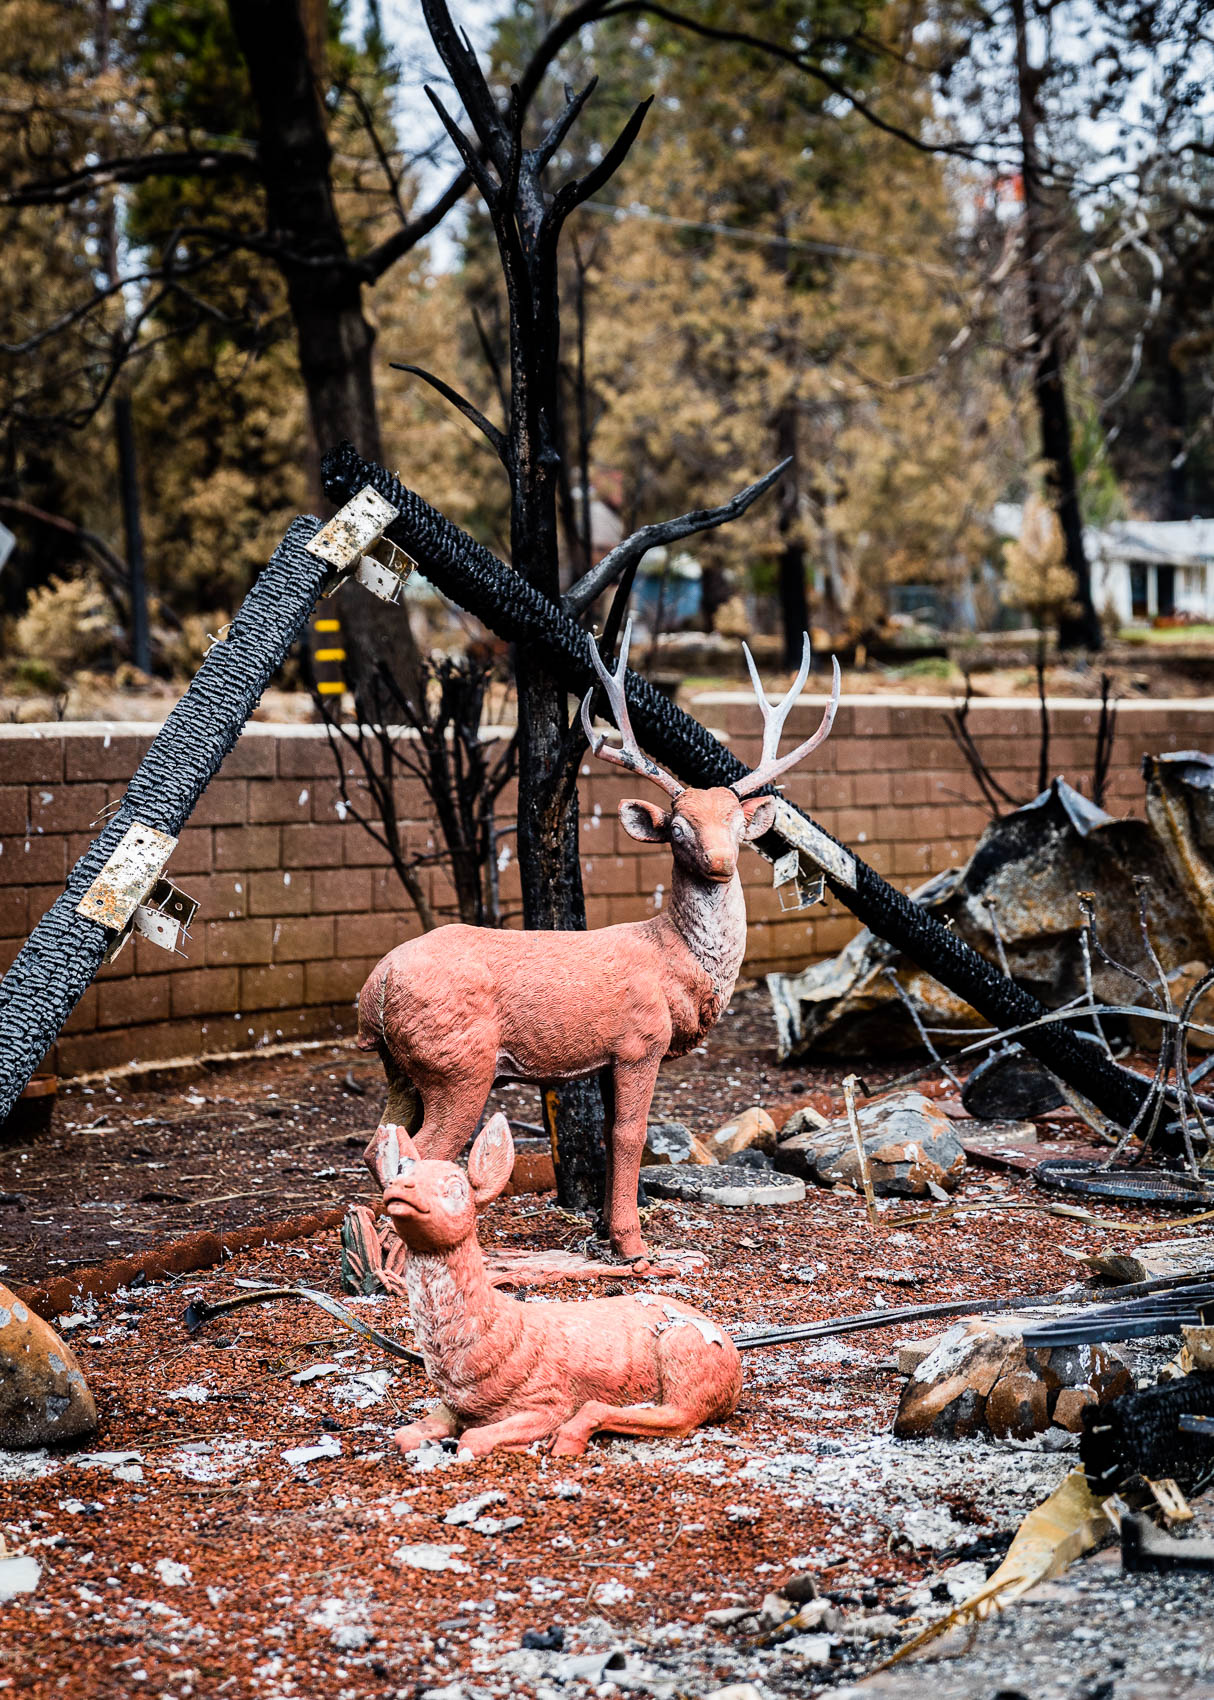 Paradise Lost. After the Camp Fire - the deadliest and most destructive wildfire in California history | PATRICK STRATTNER PHOTOGRAPHY